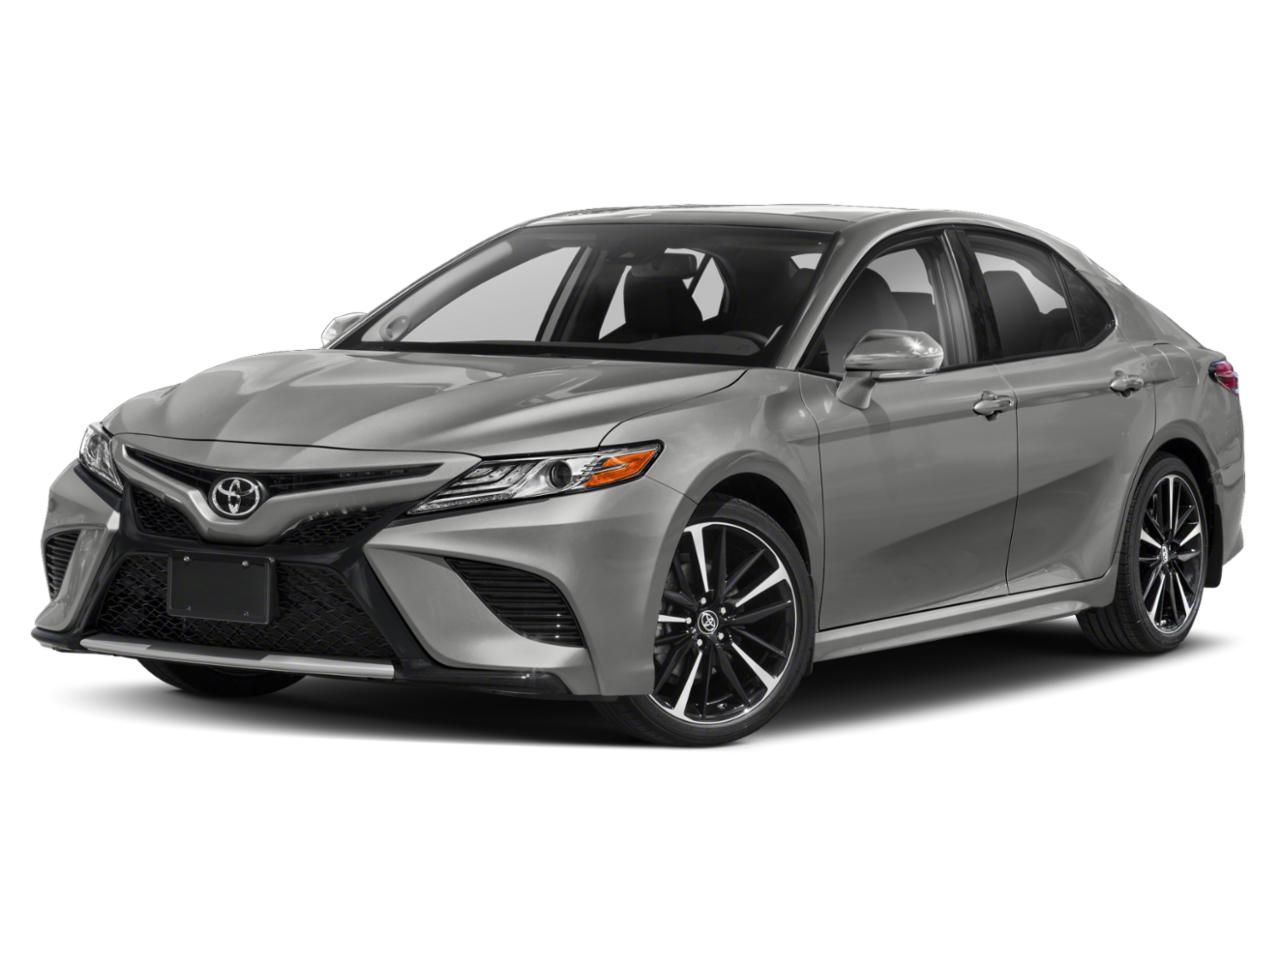 2019 Toyota Camry Vehicle Photo in Denison, TX 75020